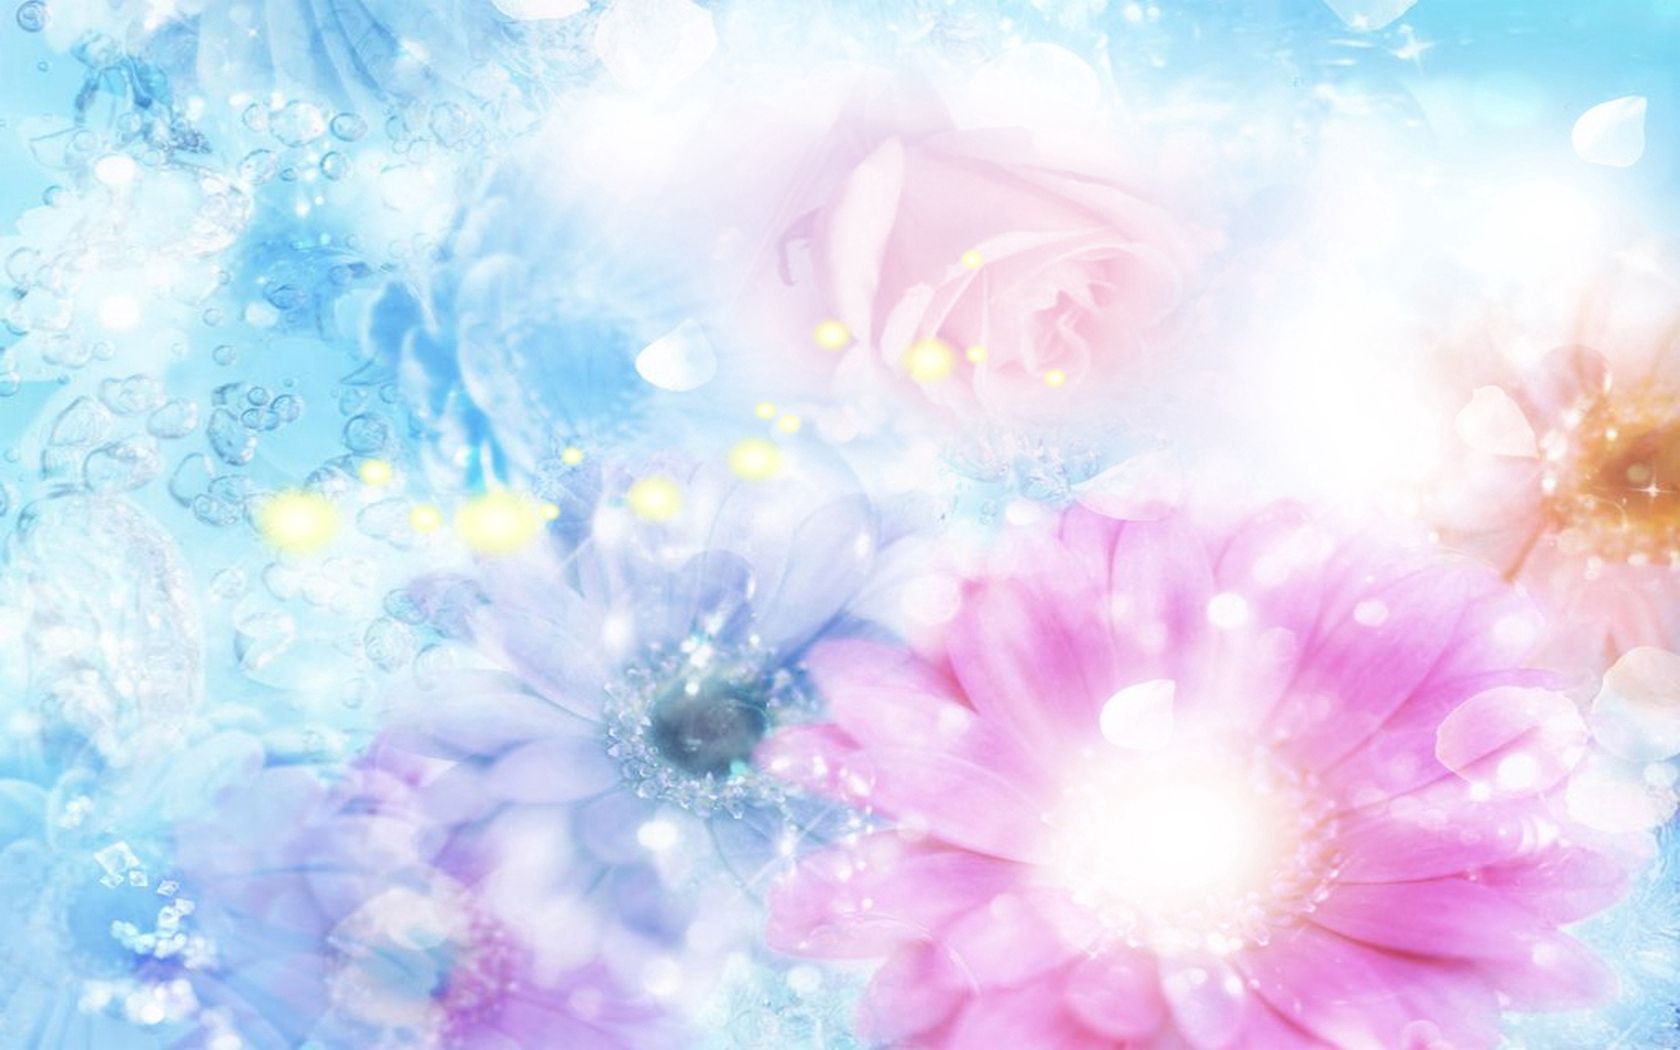 105906 download wallpaper flowers, abstract, background, pink, blue, blurred, fuzzy, effects screensavers and pictures for free